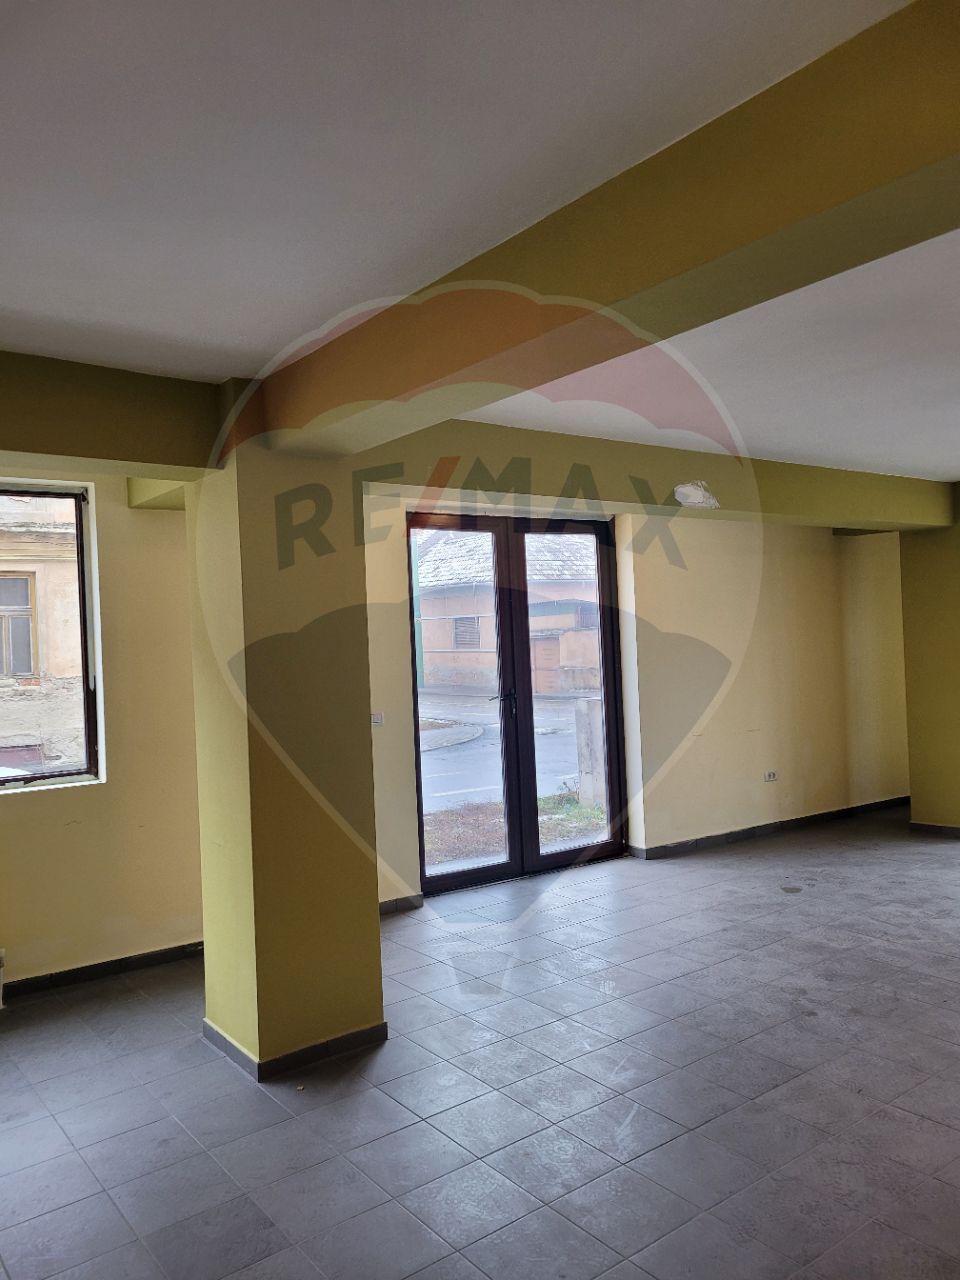 79sq.m Office Space for sale, Boul Rosu area